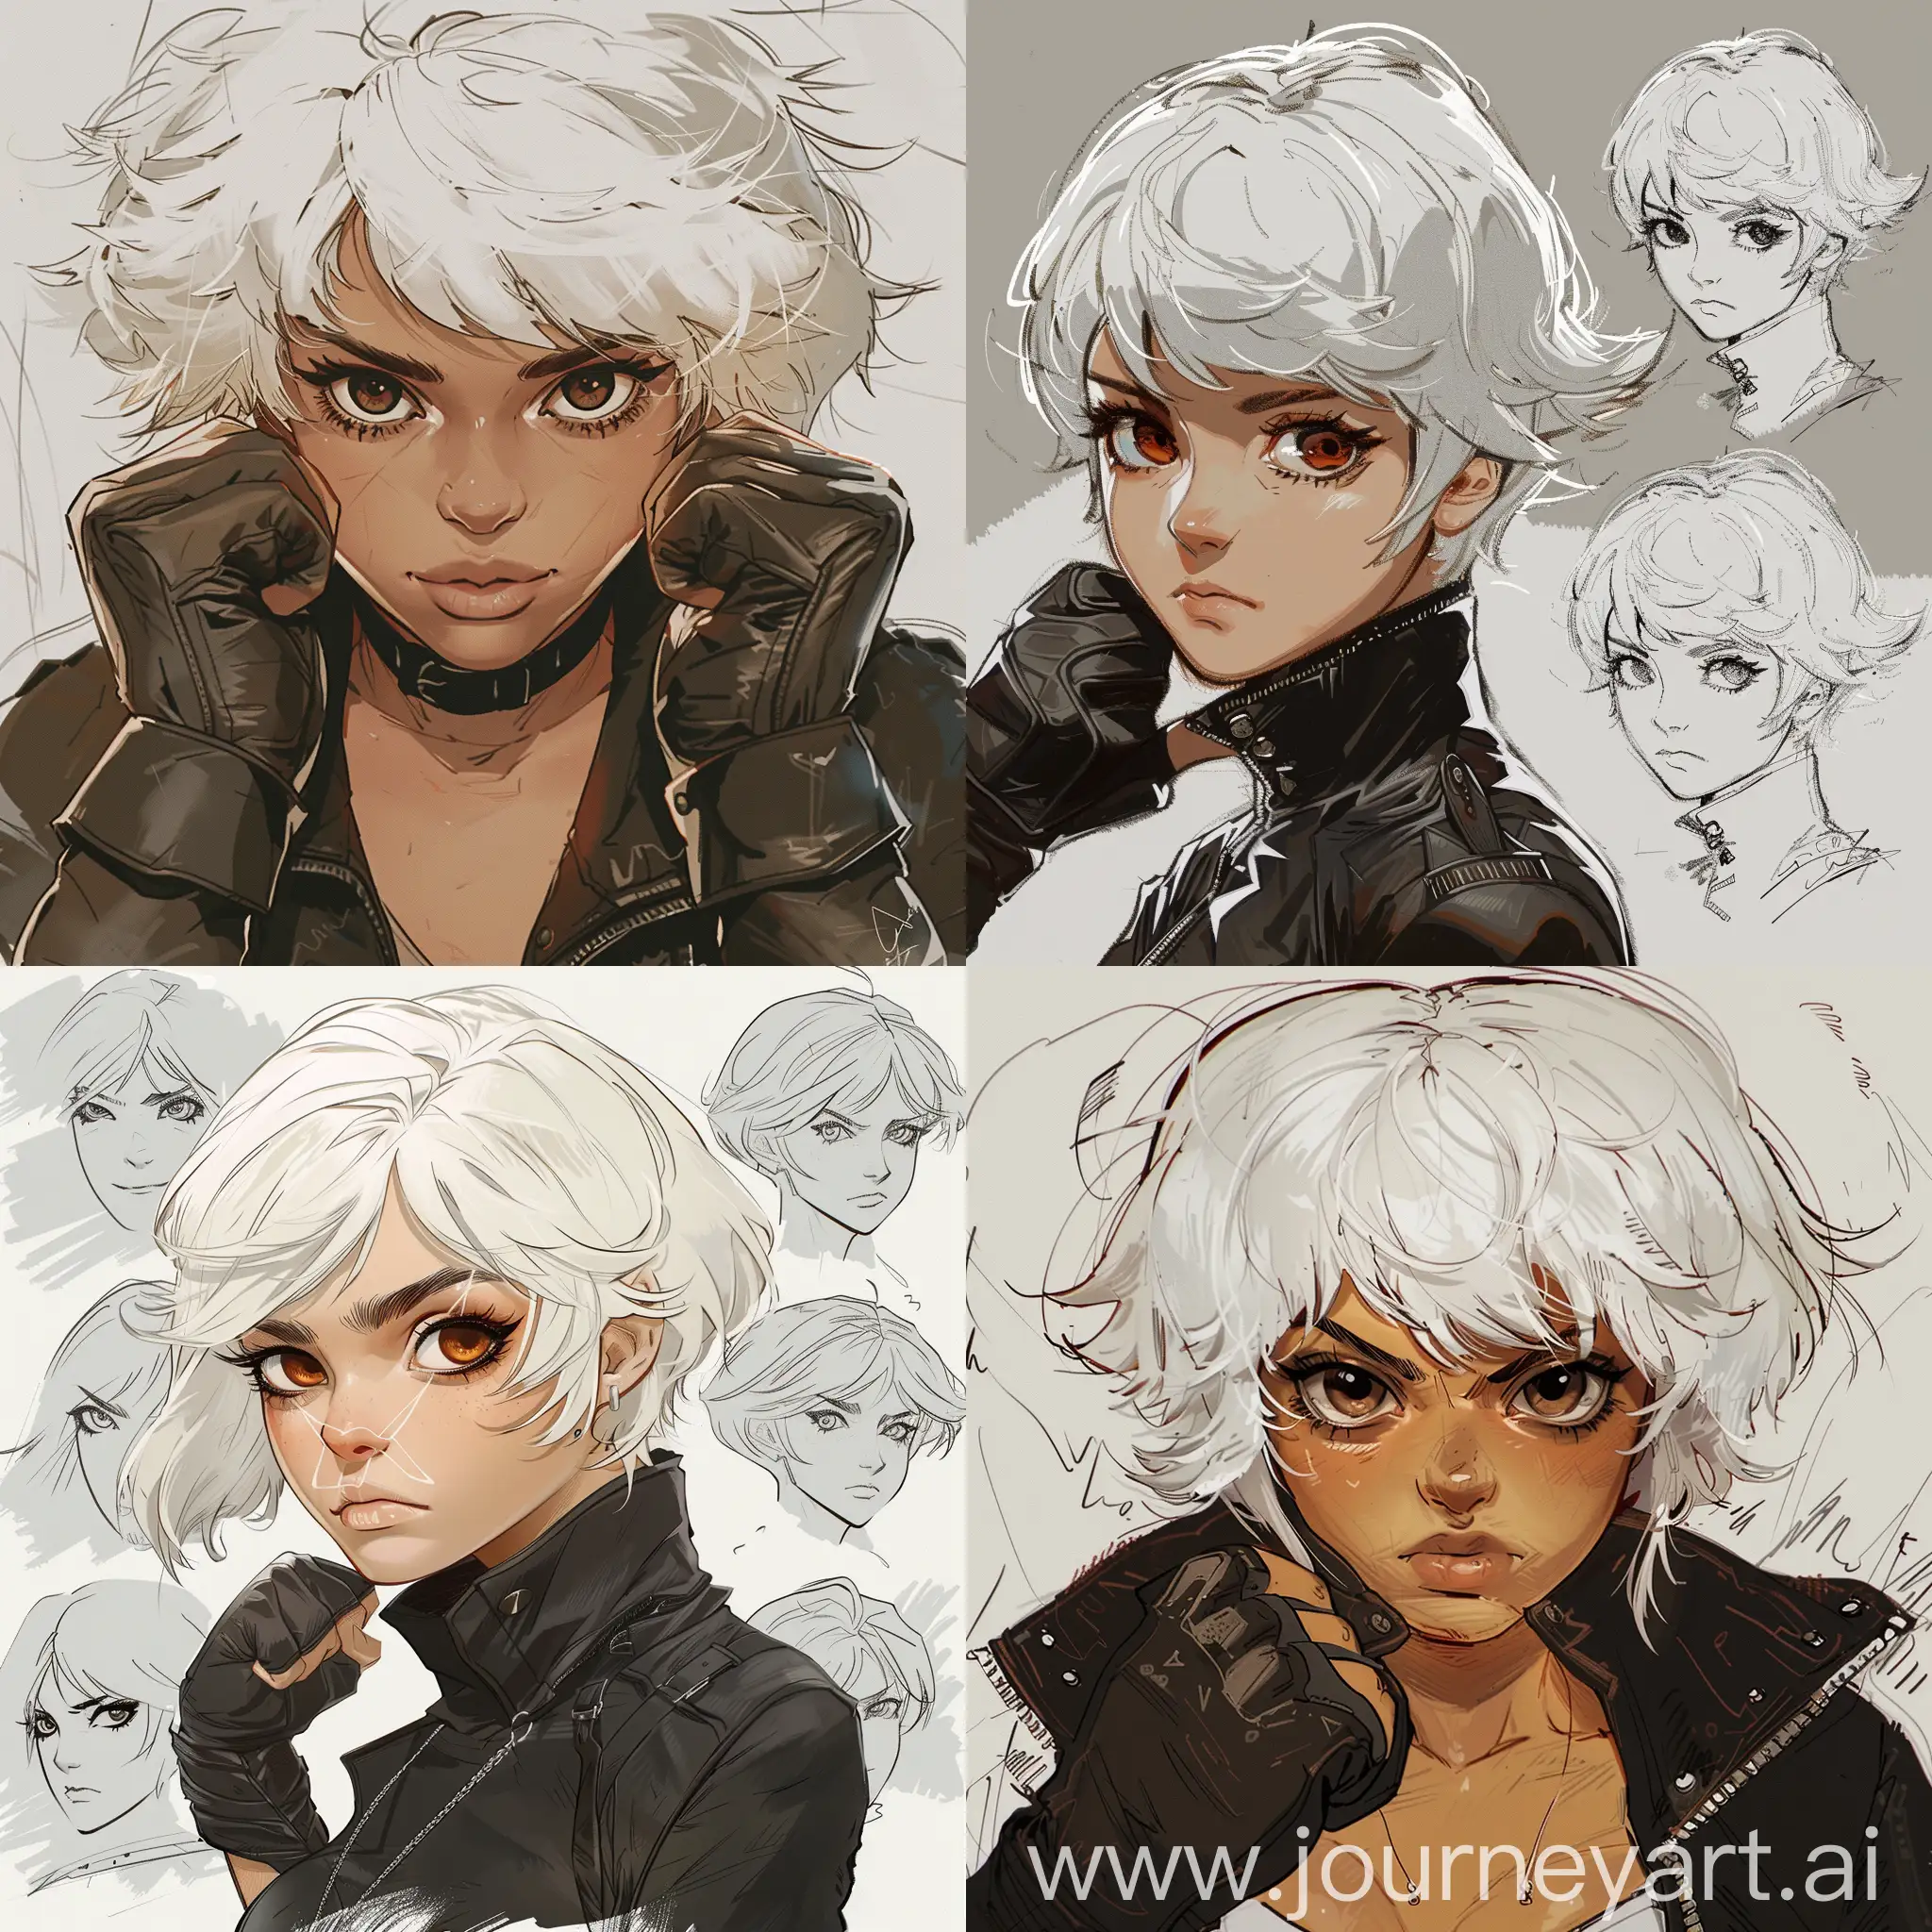 Anime-Sketch-Badass-Young-Woman-with-Fluffy-White-Hair-and-Leather-Gloves